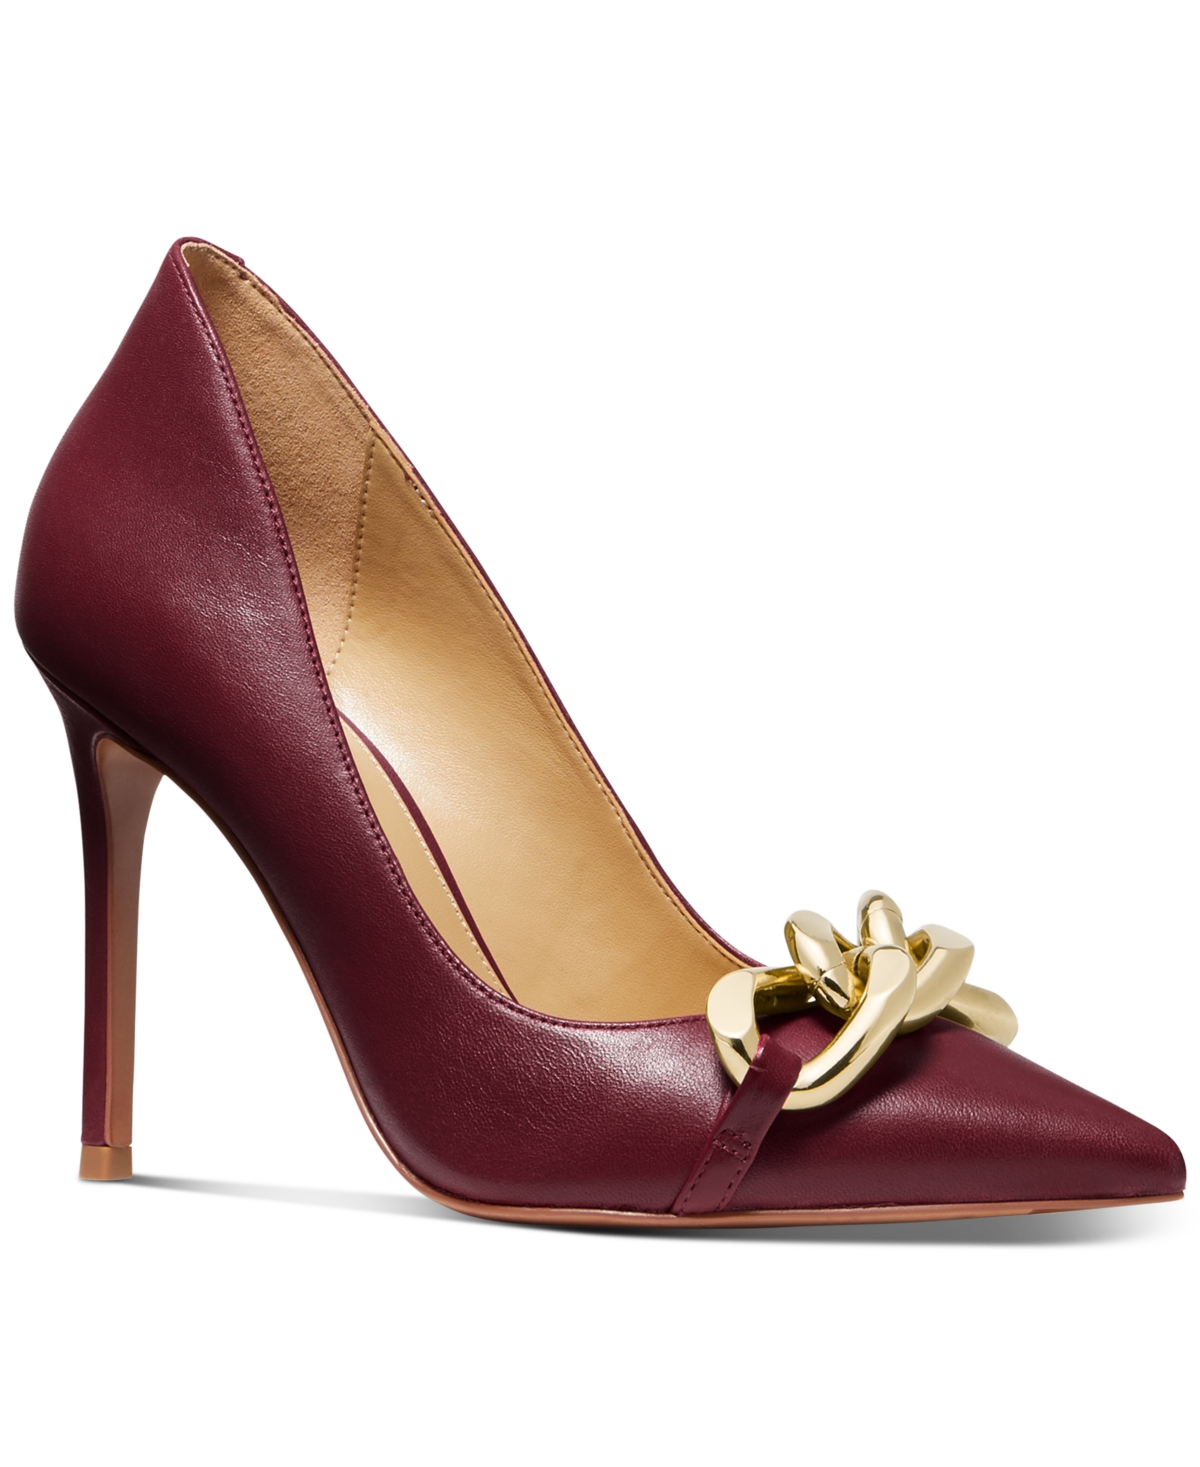 UPC 195512620959 product image for Michael Michael Kors Women's Scarlett Pointed-Toe Chain Pumps Women's Shoes | upcitemdb.com